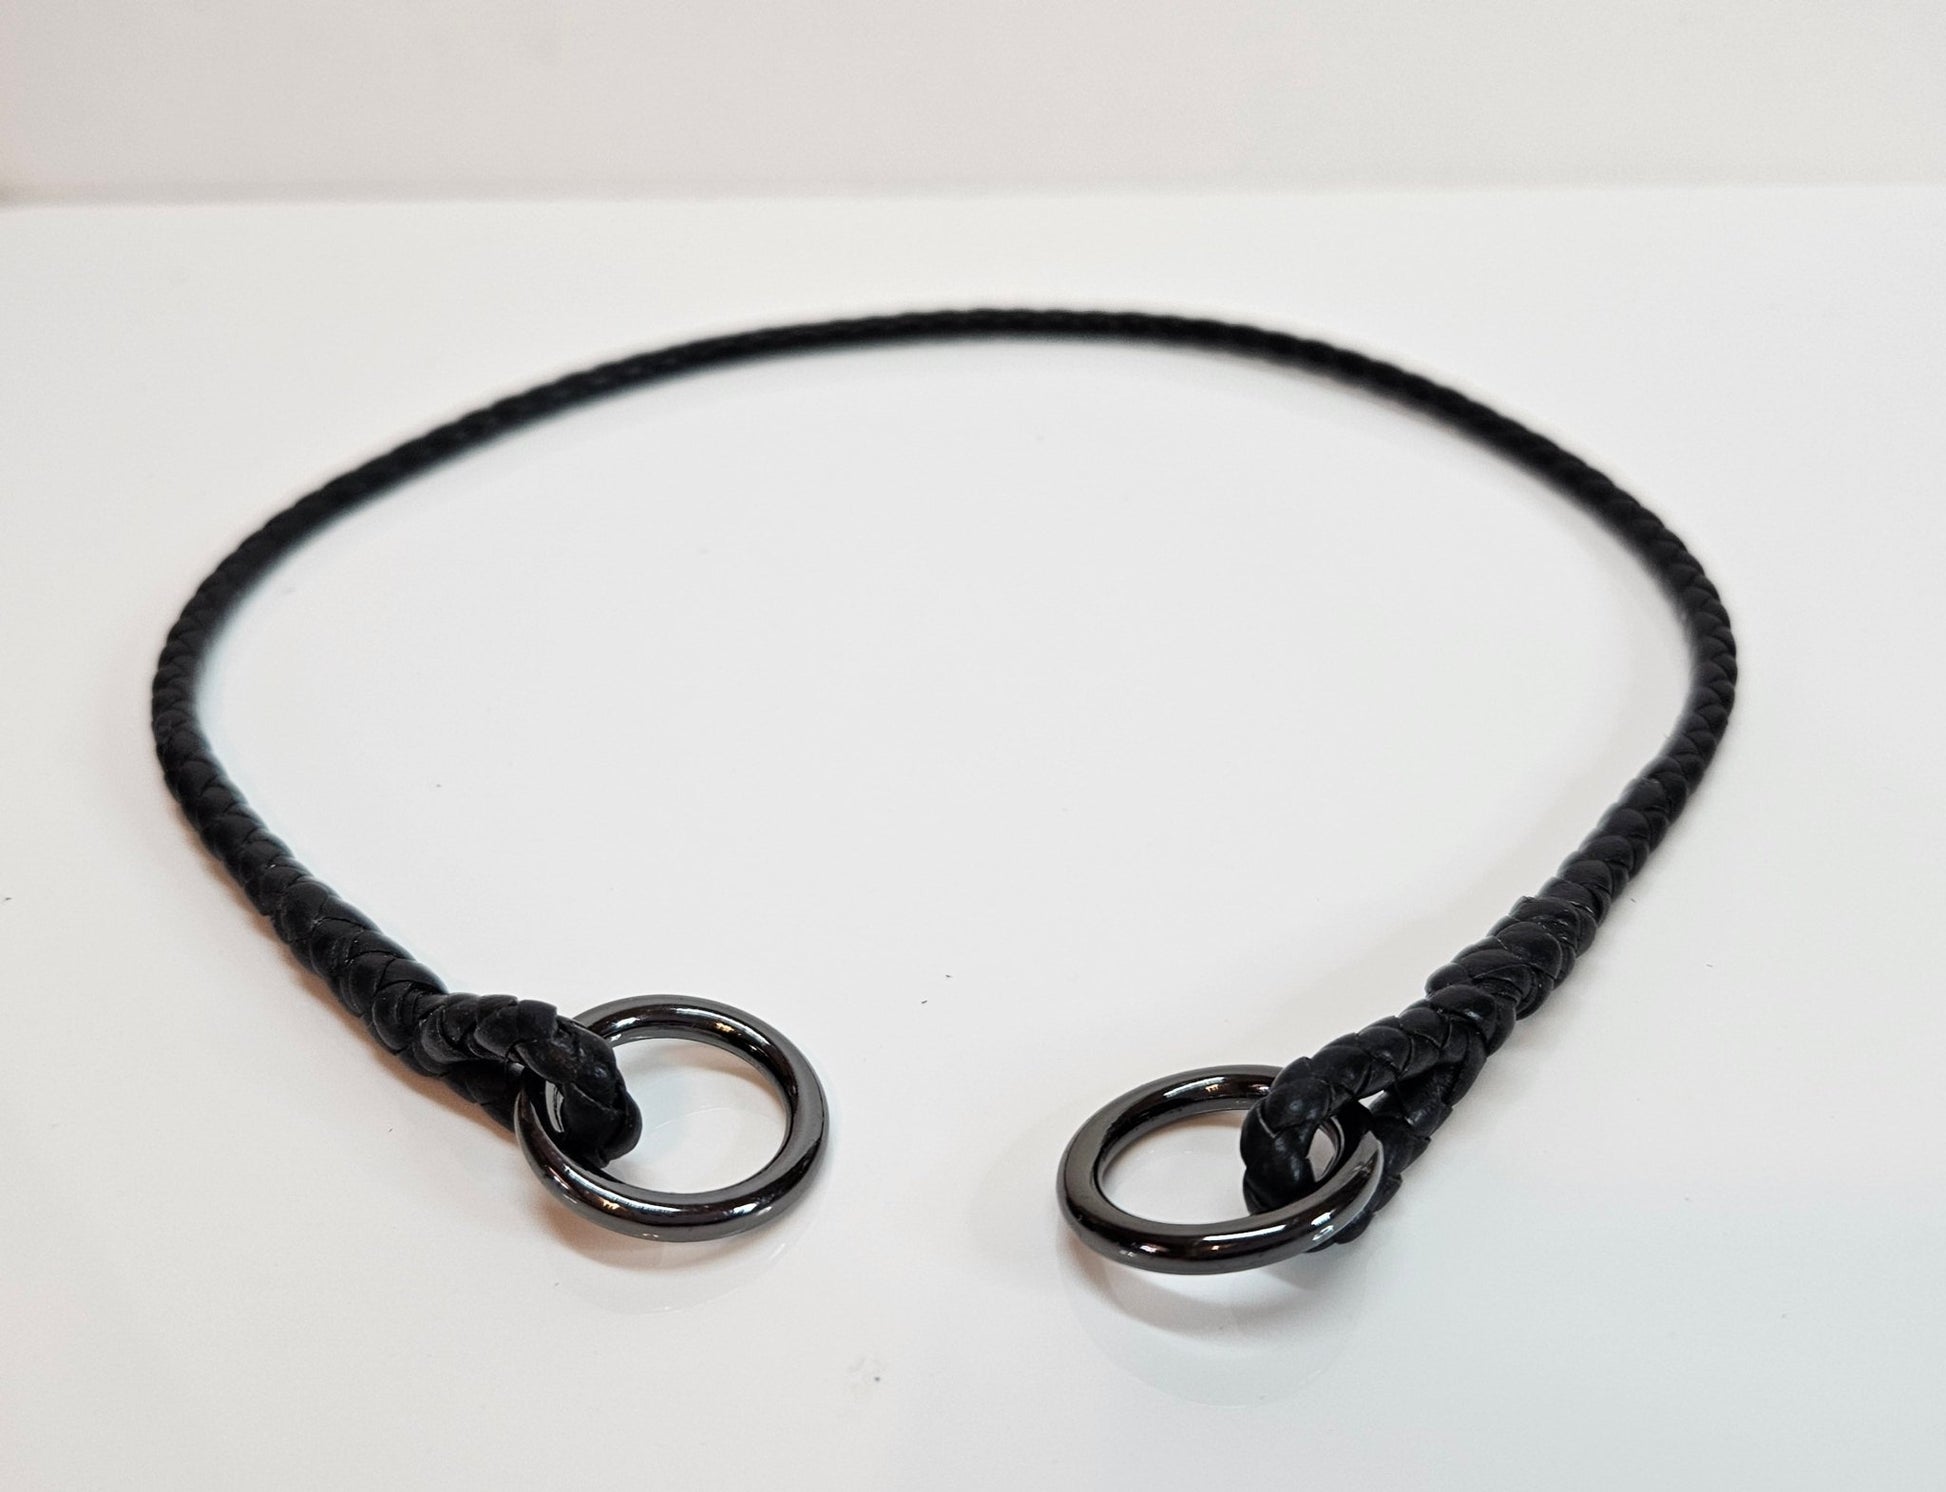 Premade 15.5" Slip Collar with Gunmetal rings - Champion Show Leads